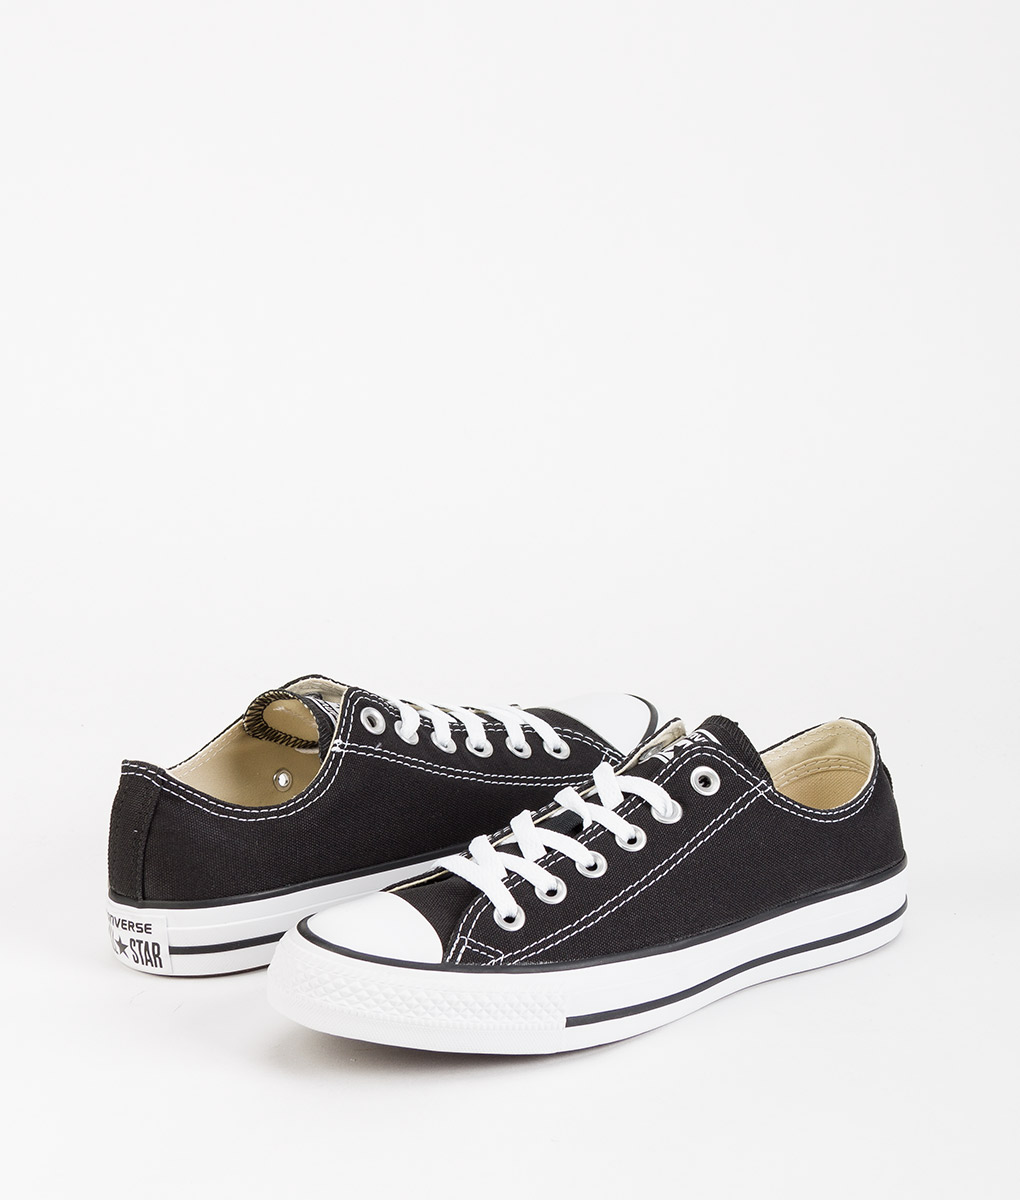 CONVERSE Unisex Sneakers M9166C ALL STAR, Black White 79.99 | T6/8